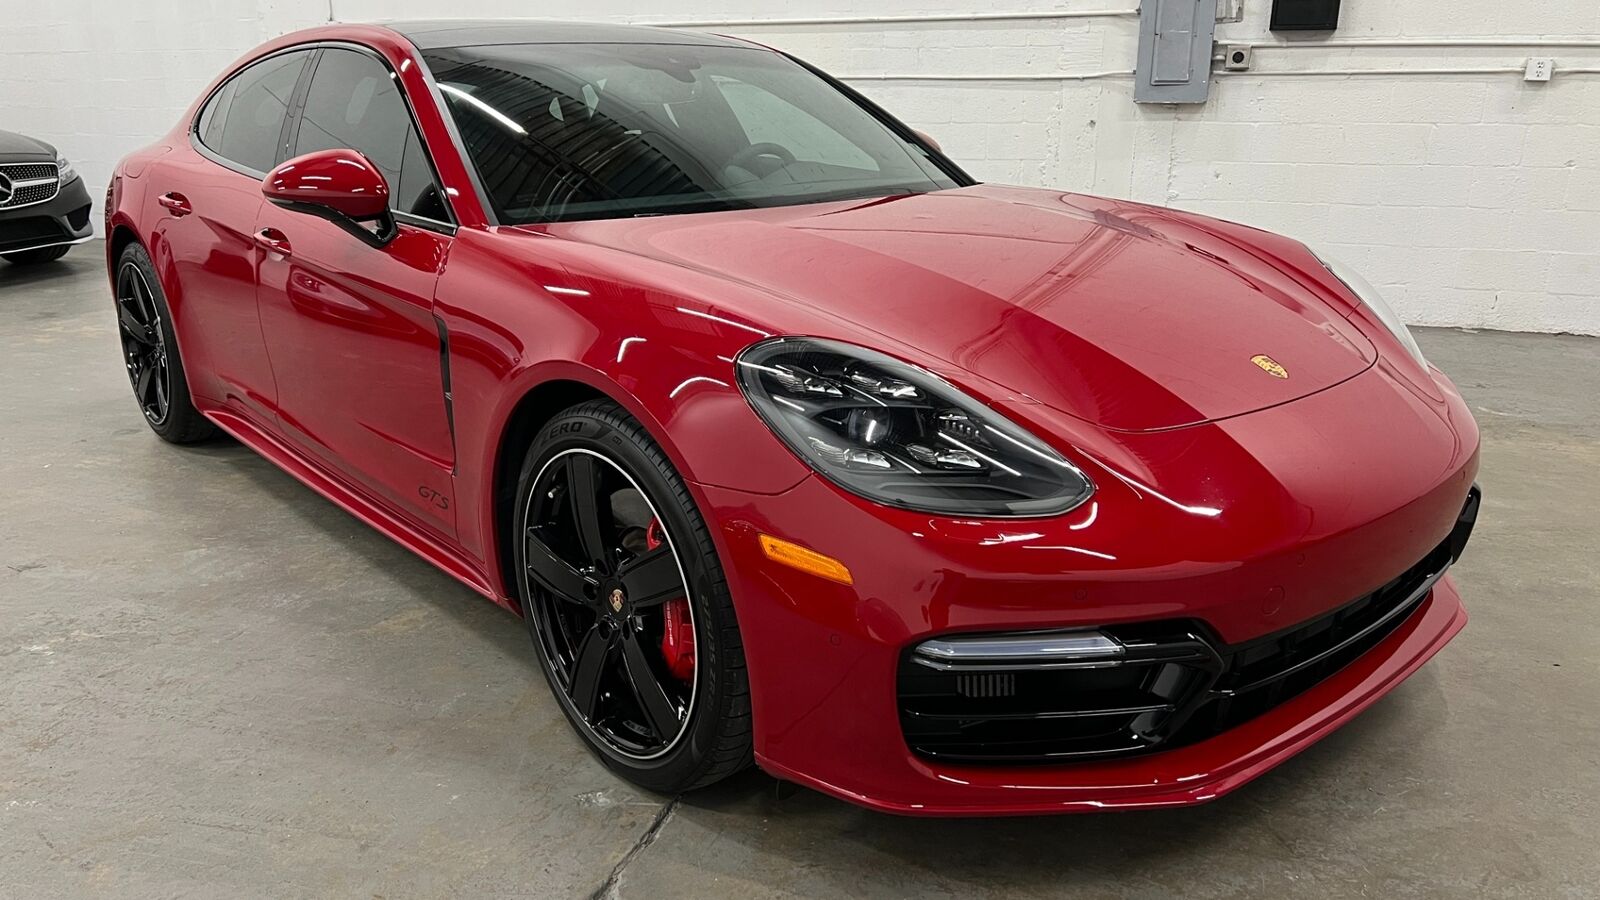 Owner 2019 PORSCHE PANAMERA GTS 28276 Miles, Red 4DR  Automatic